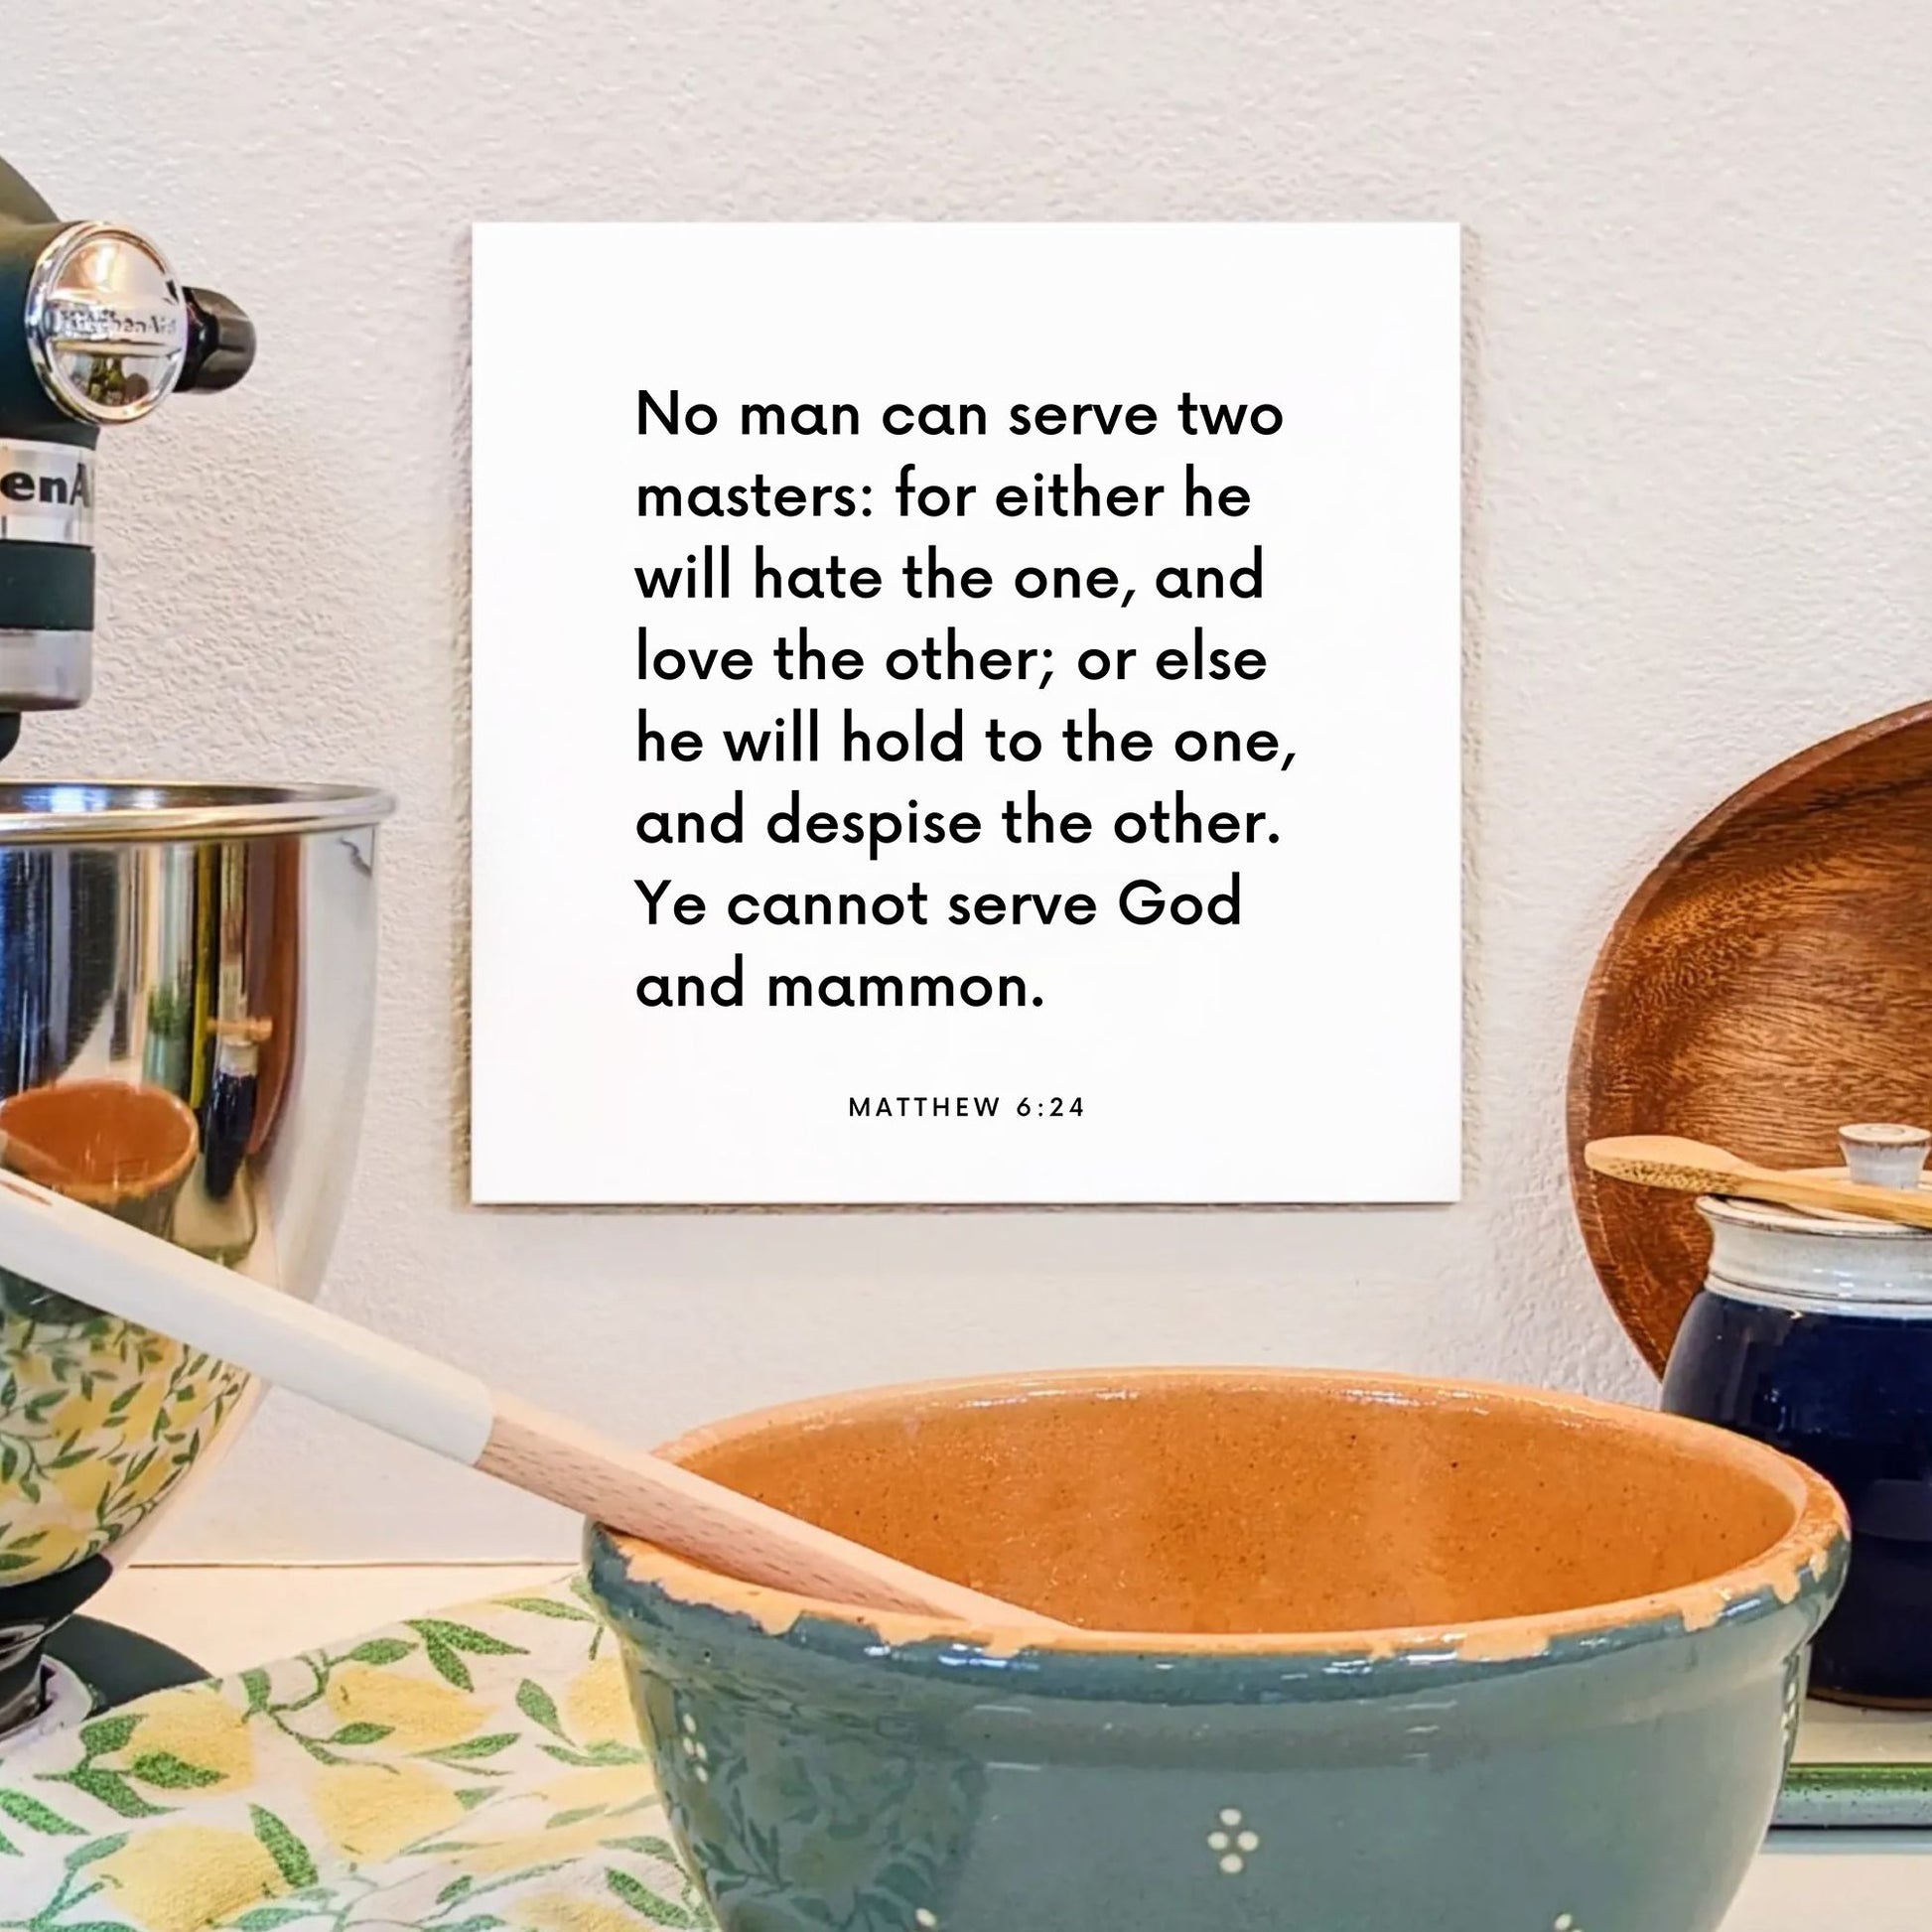 Kitchen mouting of the scripture tile for Matthew 6:24 - "No man can serve two masters"